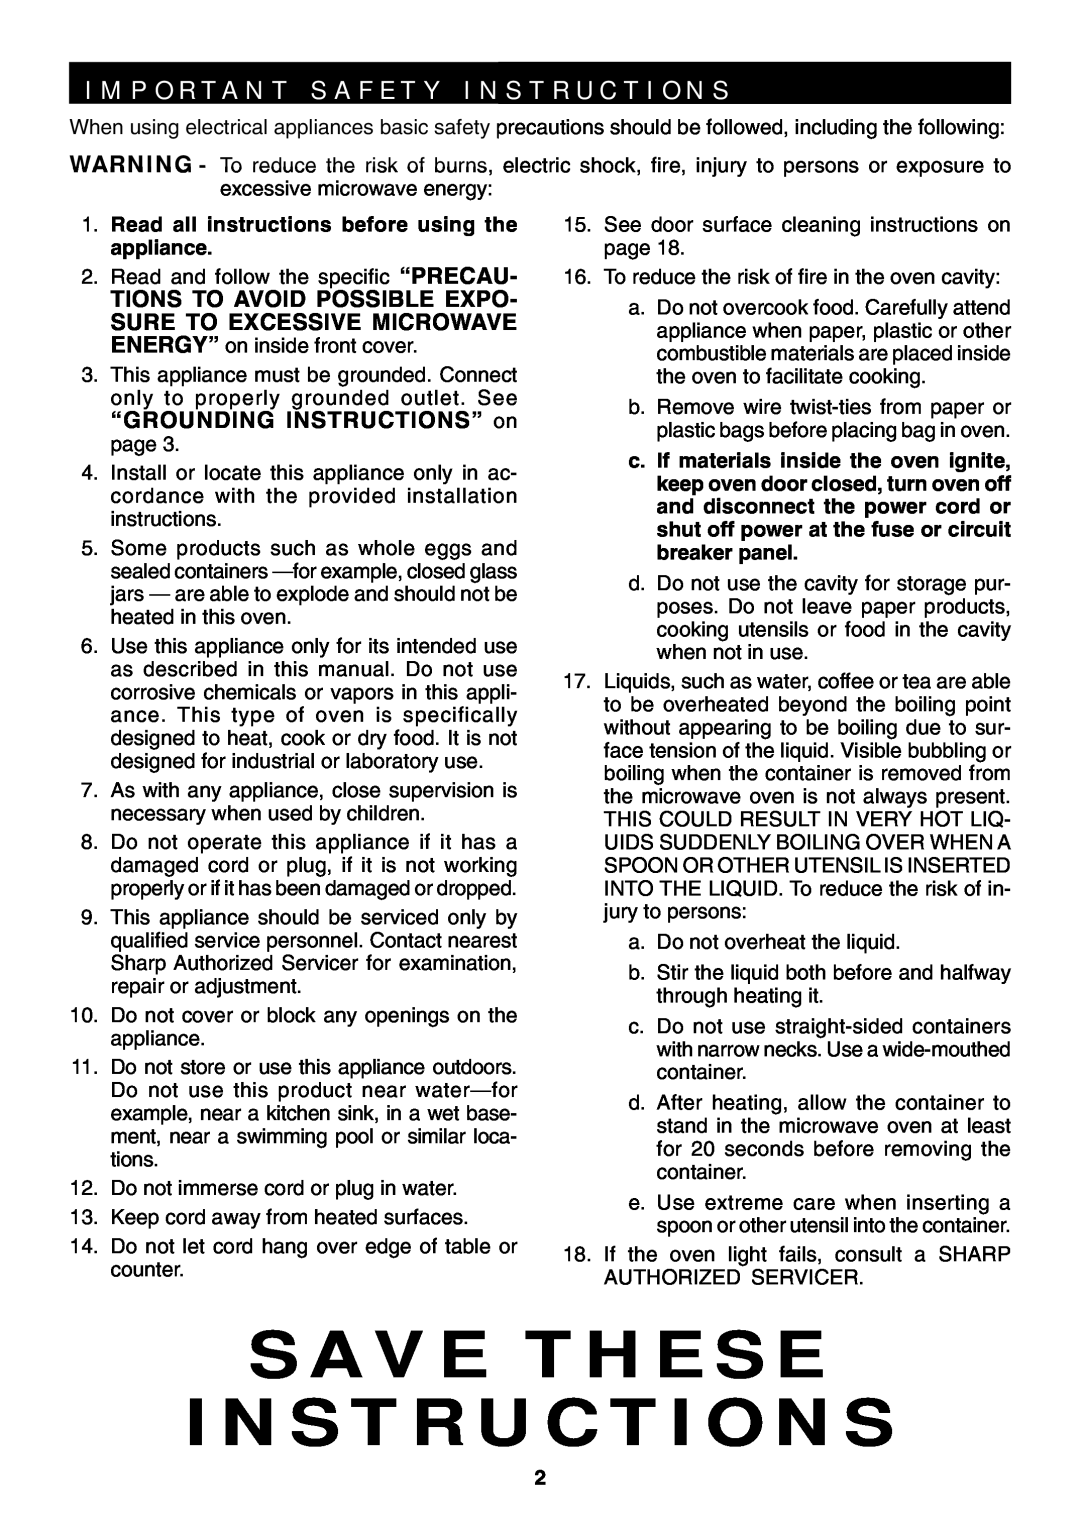 Sharp R-319F manual Save These Instructions, I M P O R T A N T S A F E T Y I N S T R U C T I O N S 